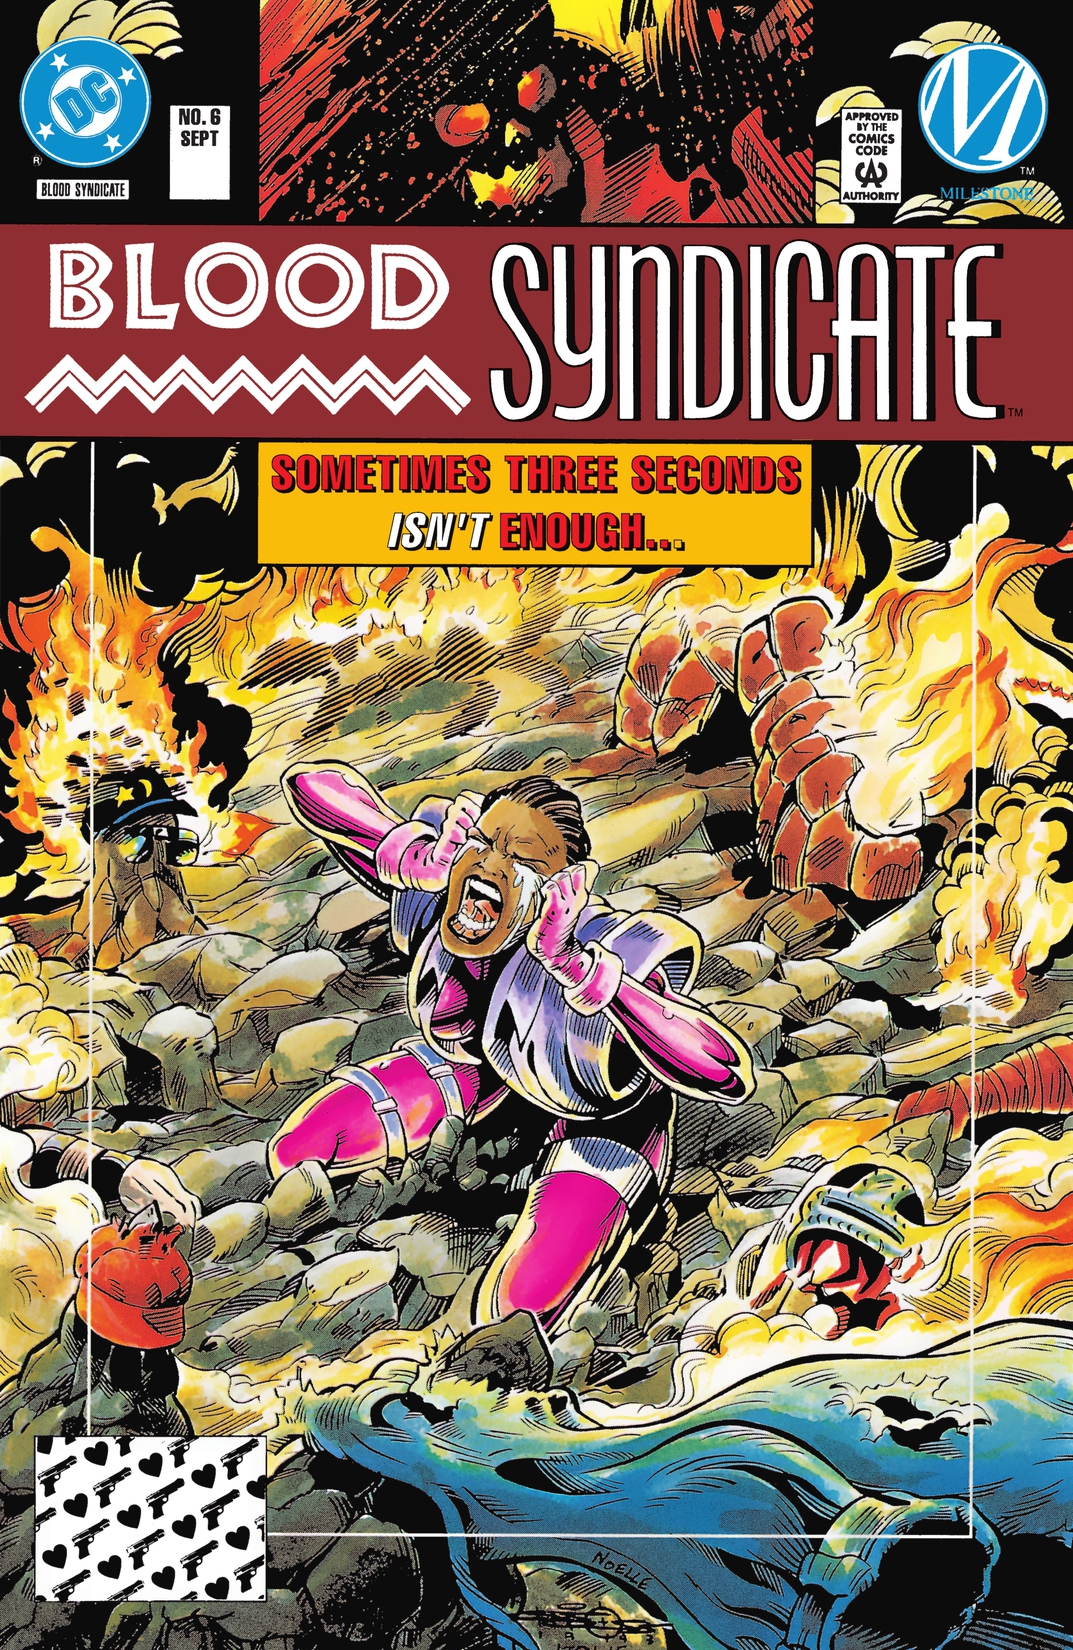 Blood Syndicate #6 preview images